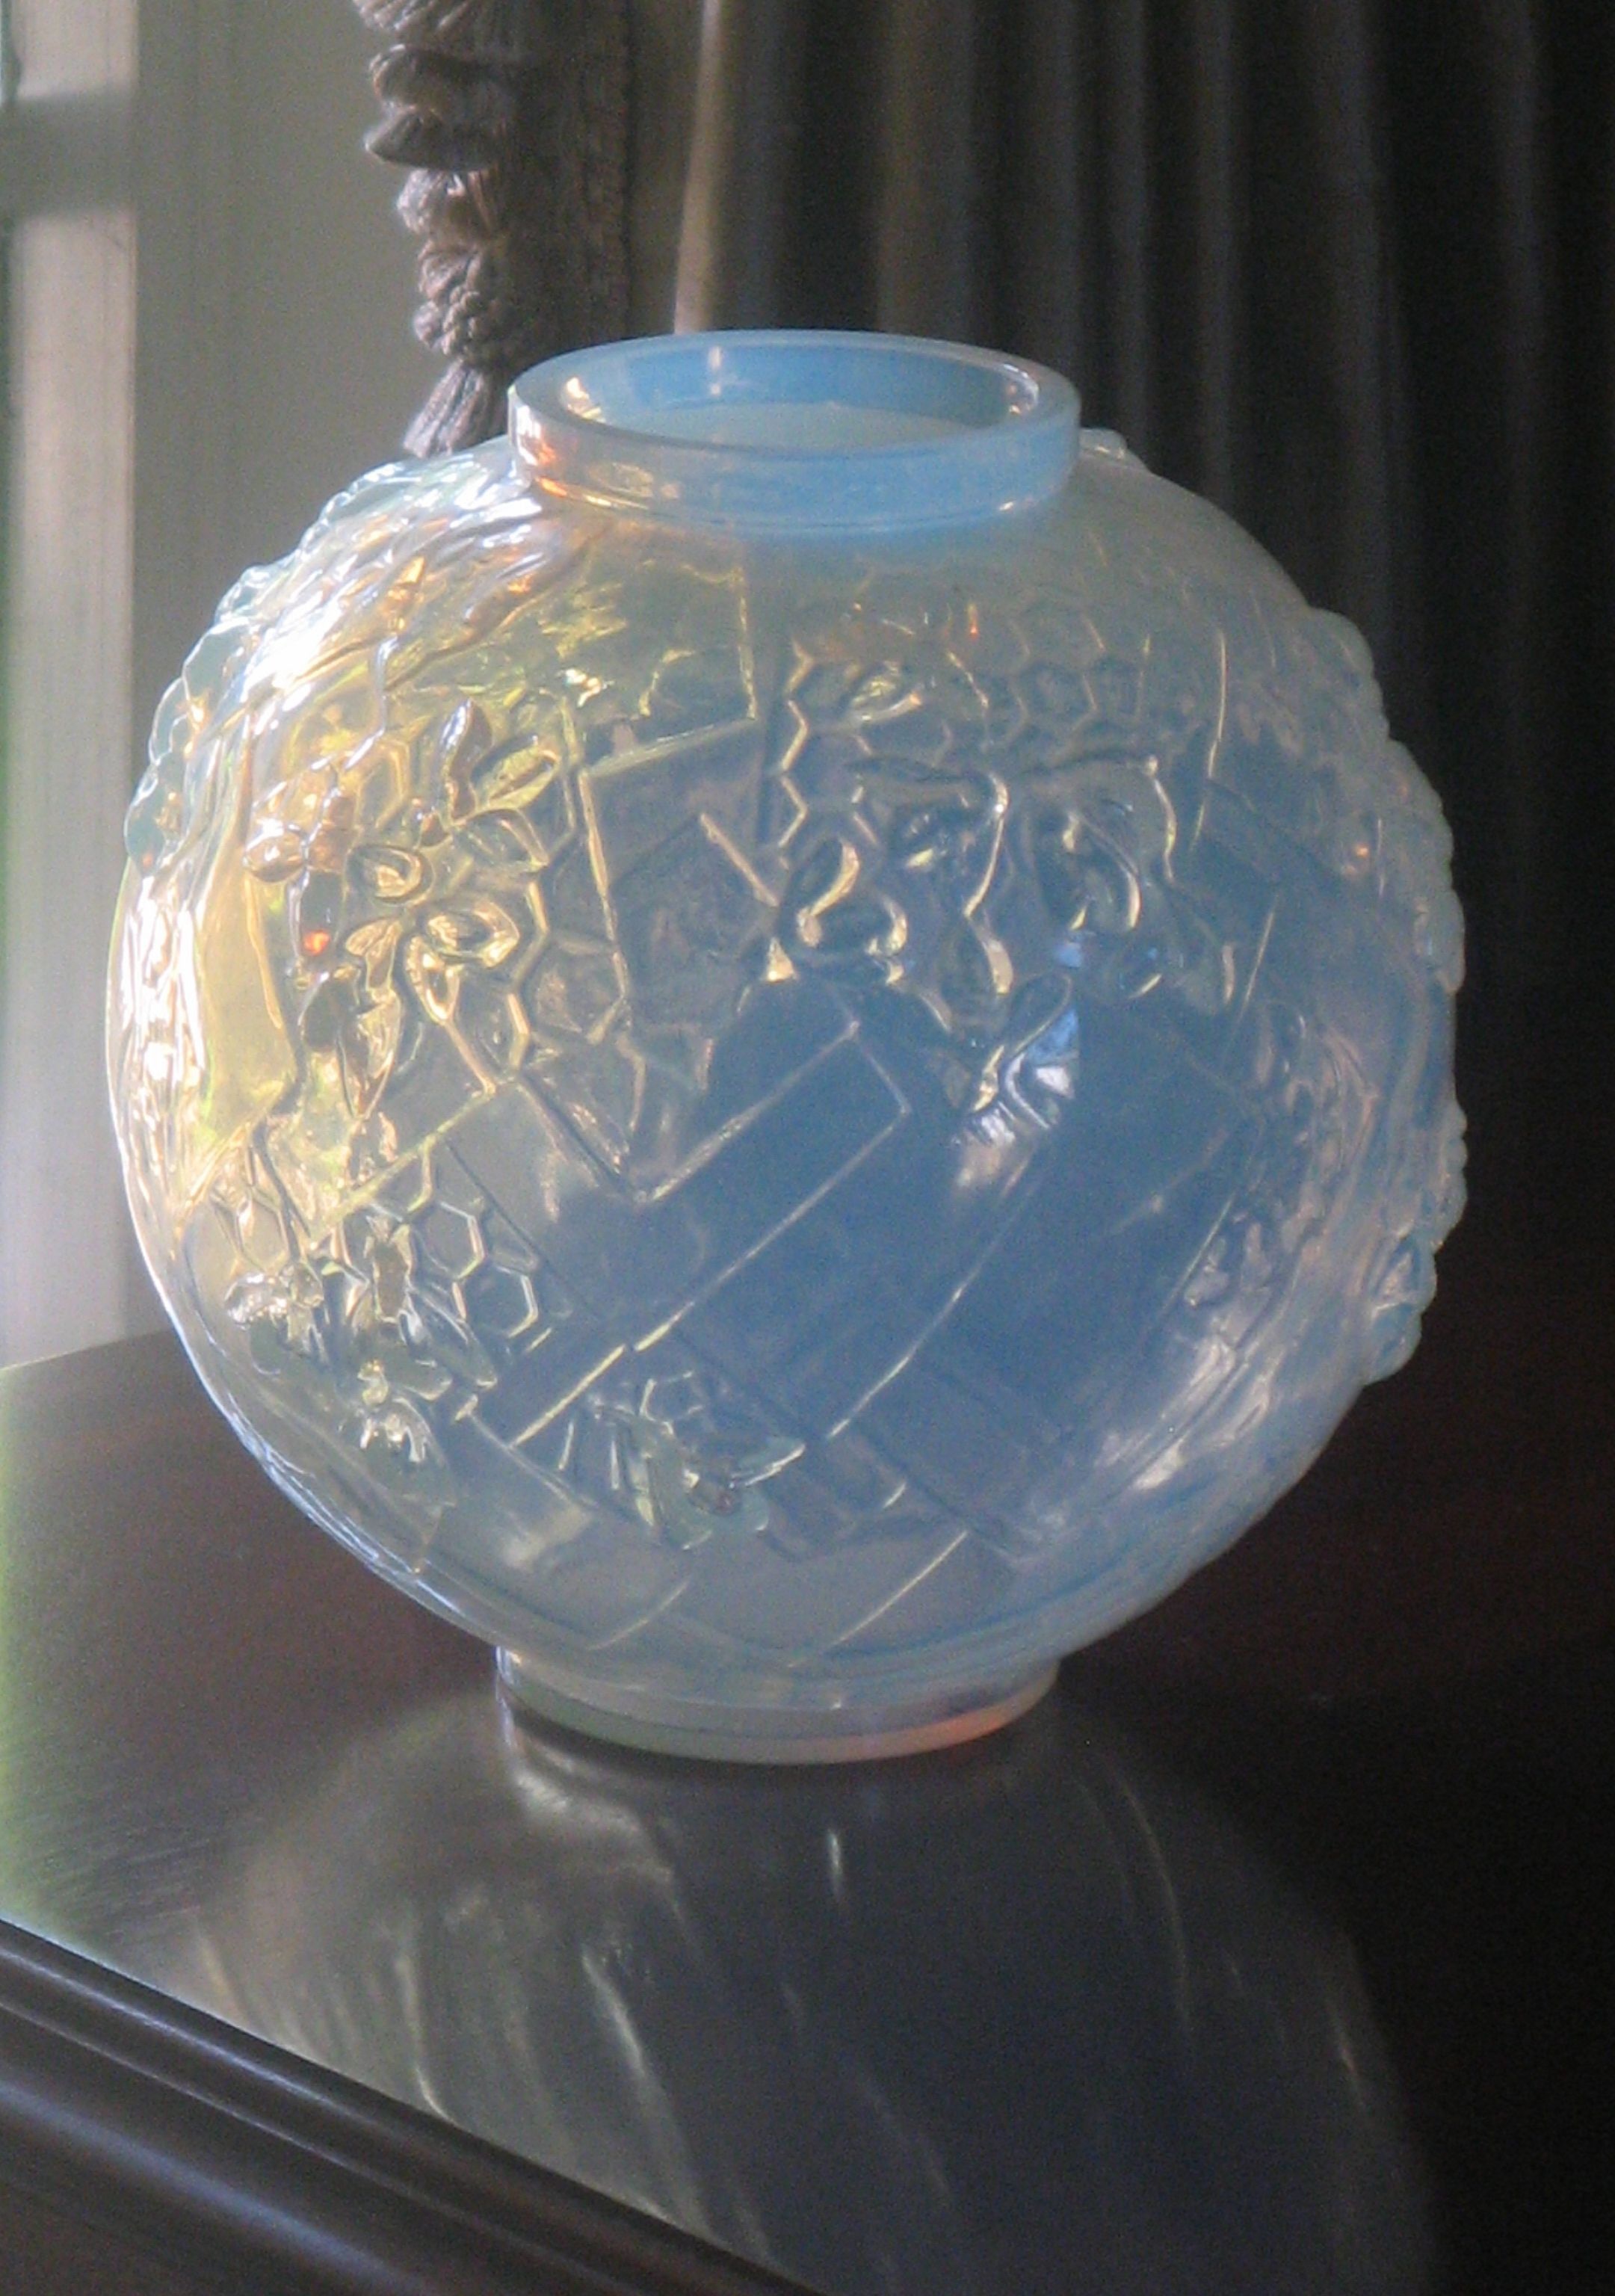 4 inch glass vase of sabino glass known for its pearly golden opalescence pricy but inside sabino glass known for its pearly golden opalescence pricy but beautiful cheaper